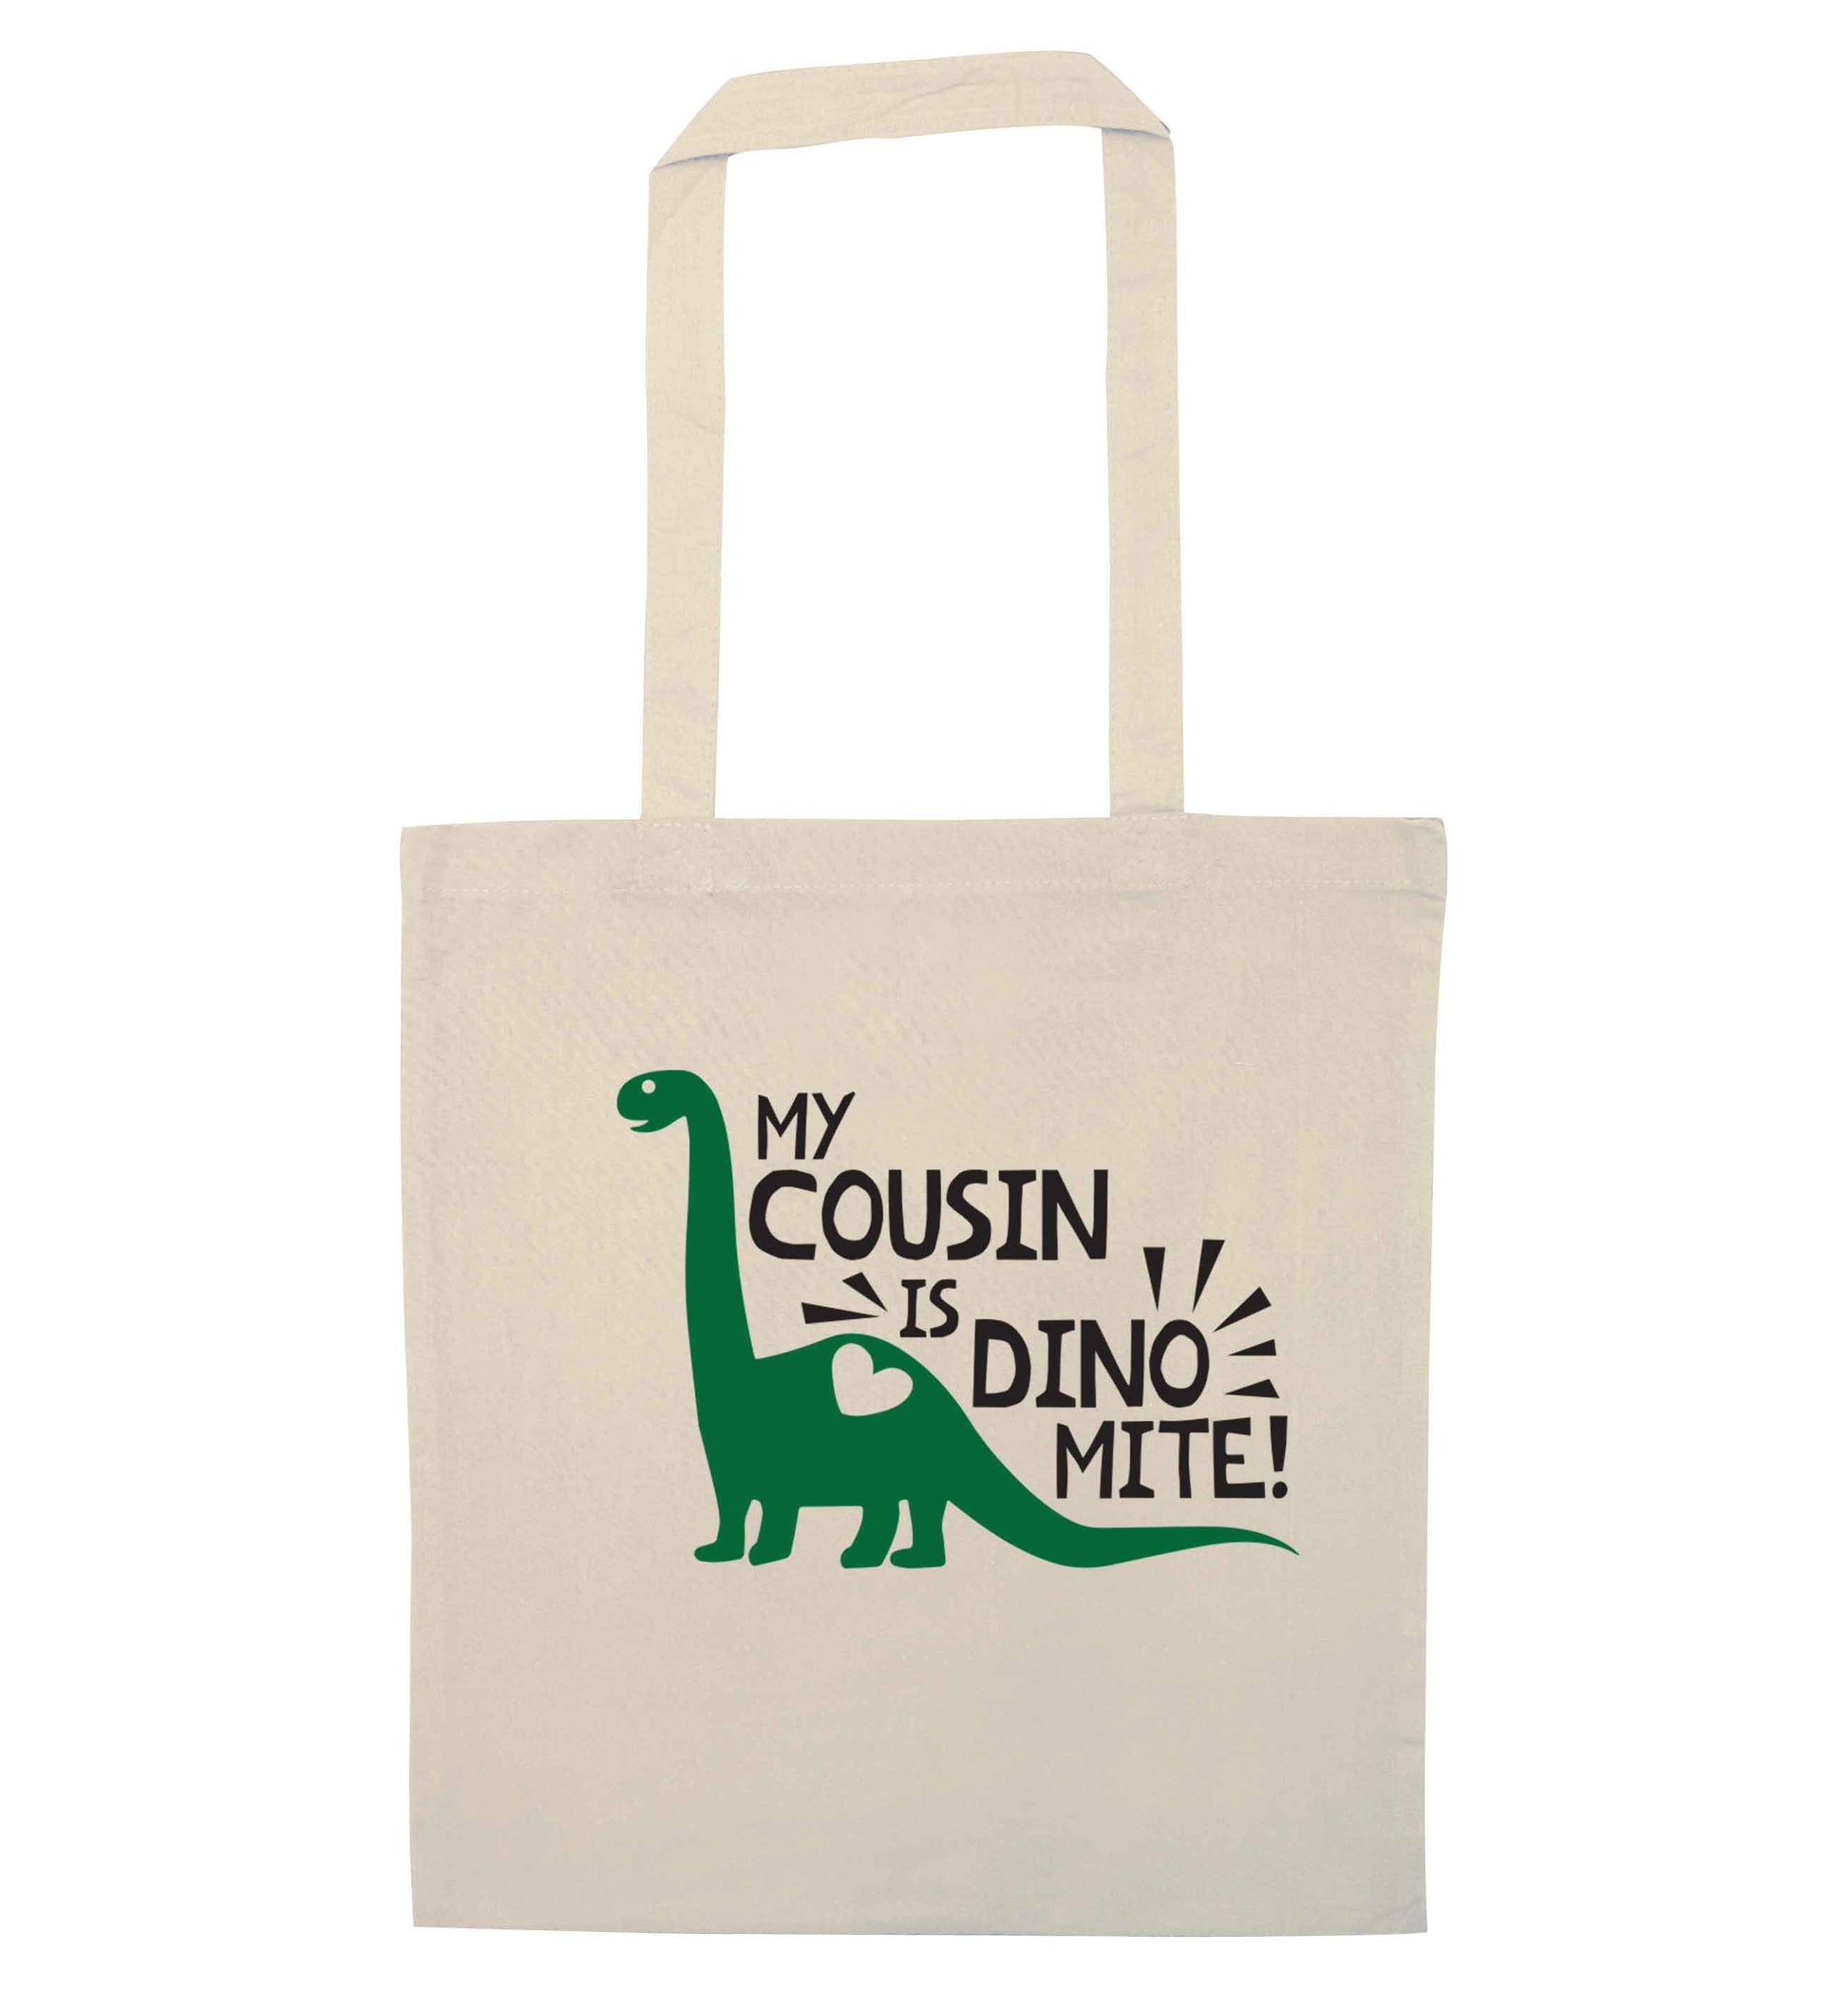 My cousin is dinomite! natural tote bag